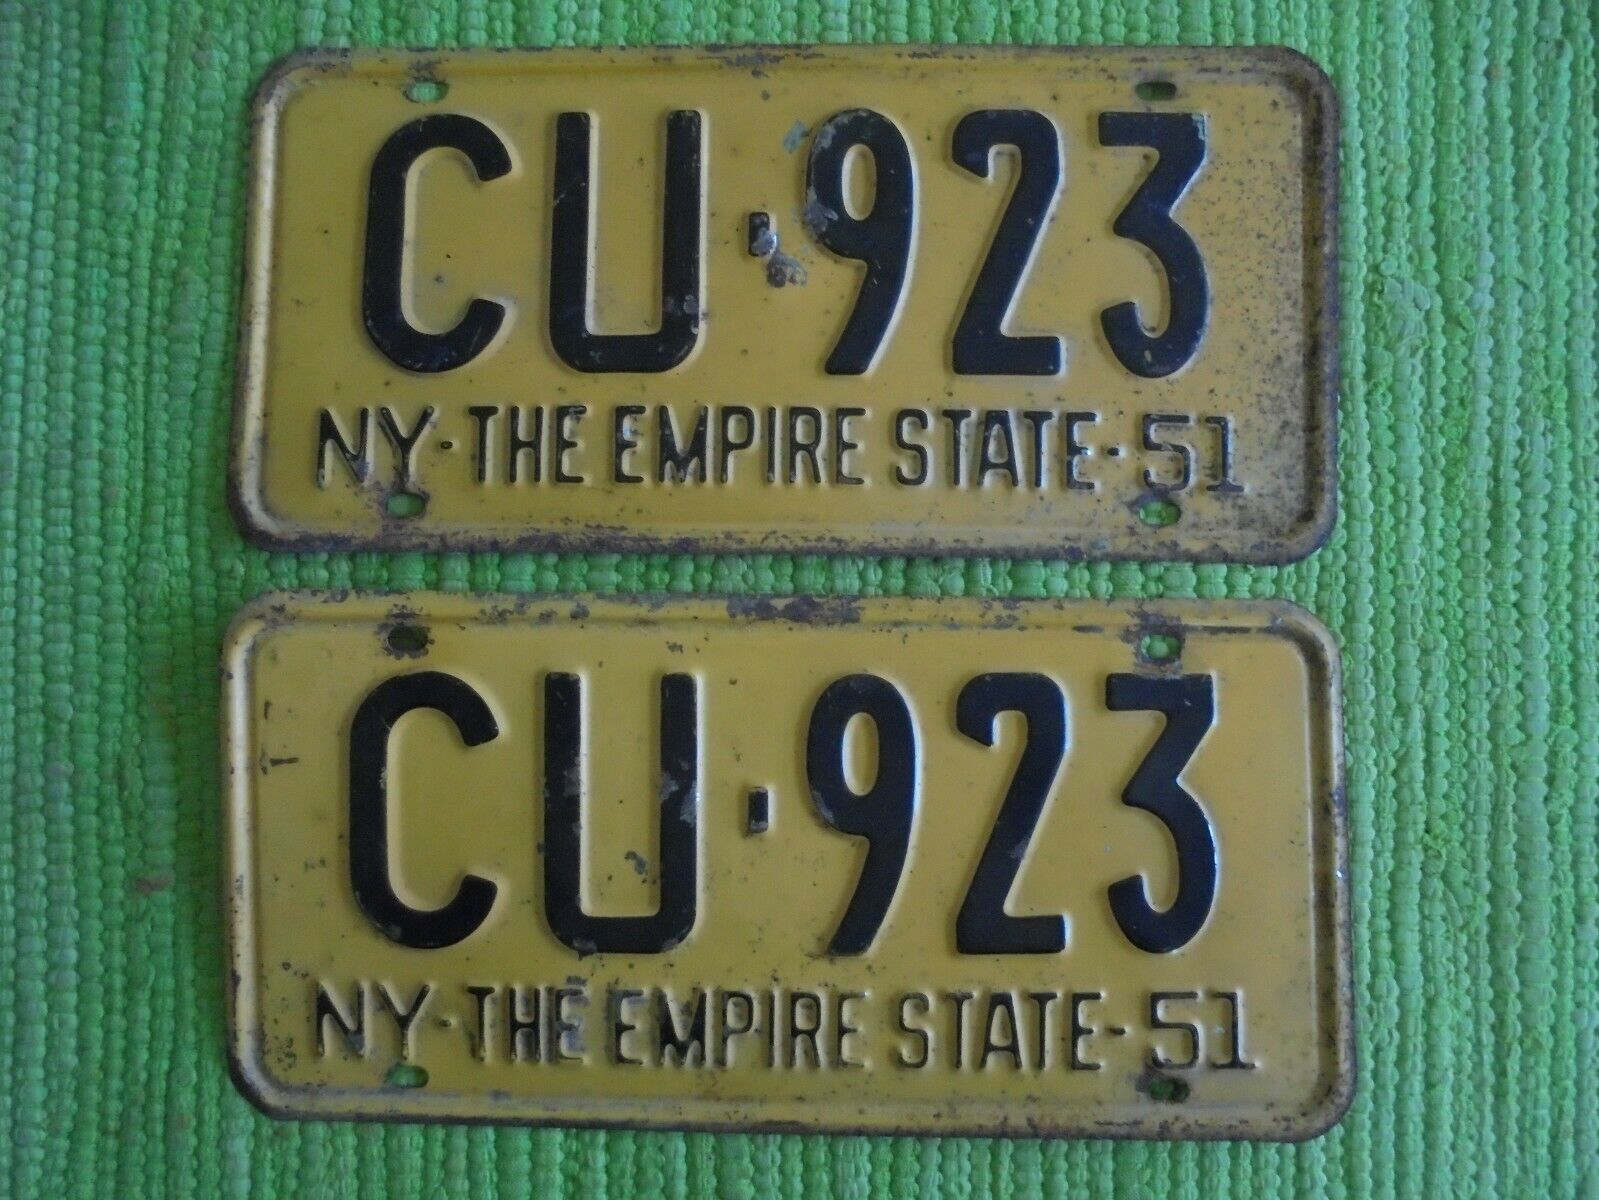 1951 New York License Plate Matched Pair 51 NY Tag CU-923 Plates Empire State